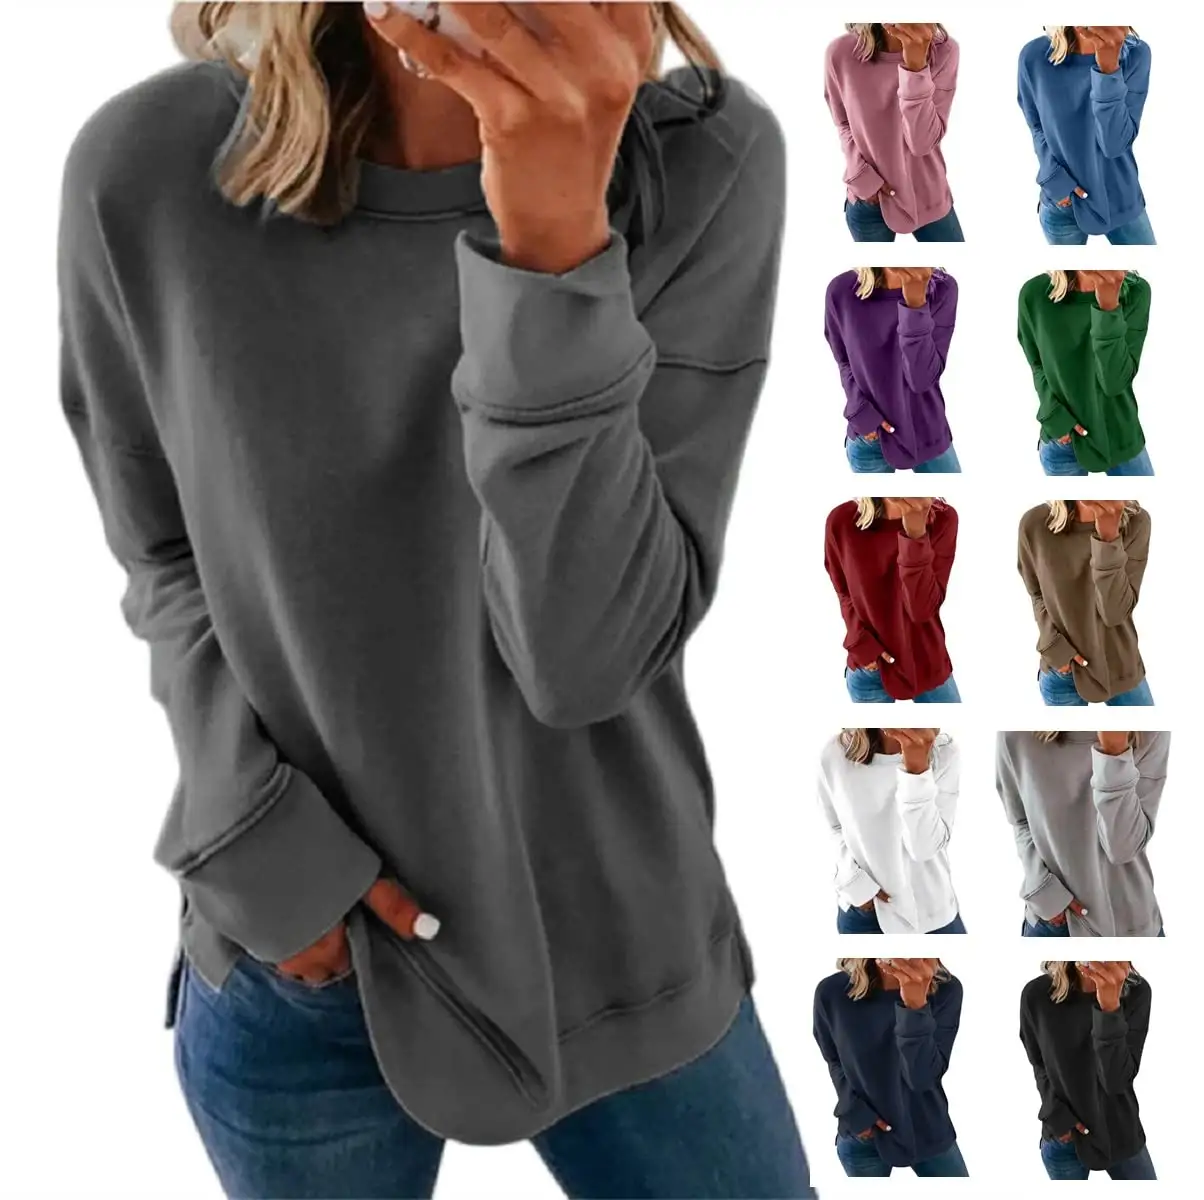 Women Fashion Thin Pullover Solid Loose Long Sleeve Sweatshirts Tops Comfy Casual Customize T Shirt